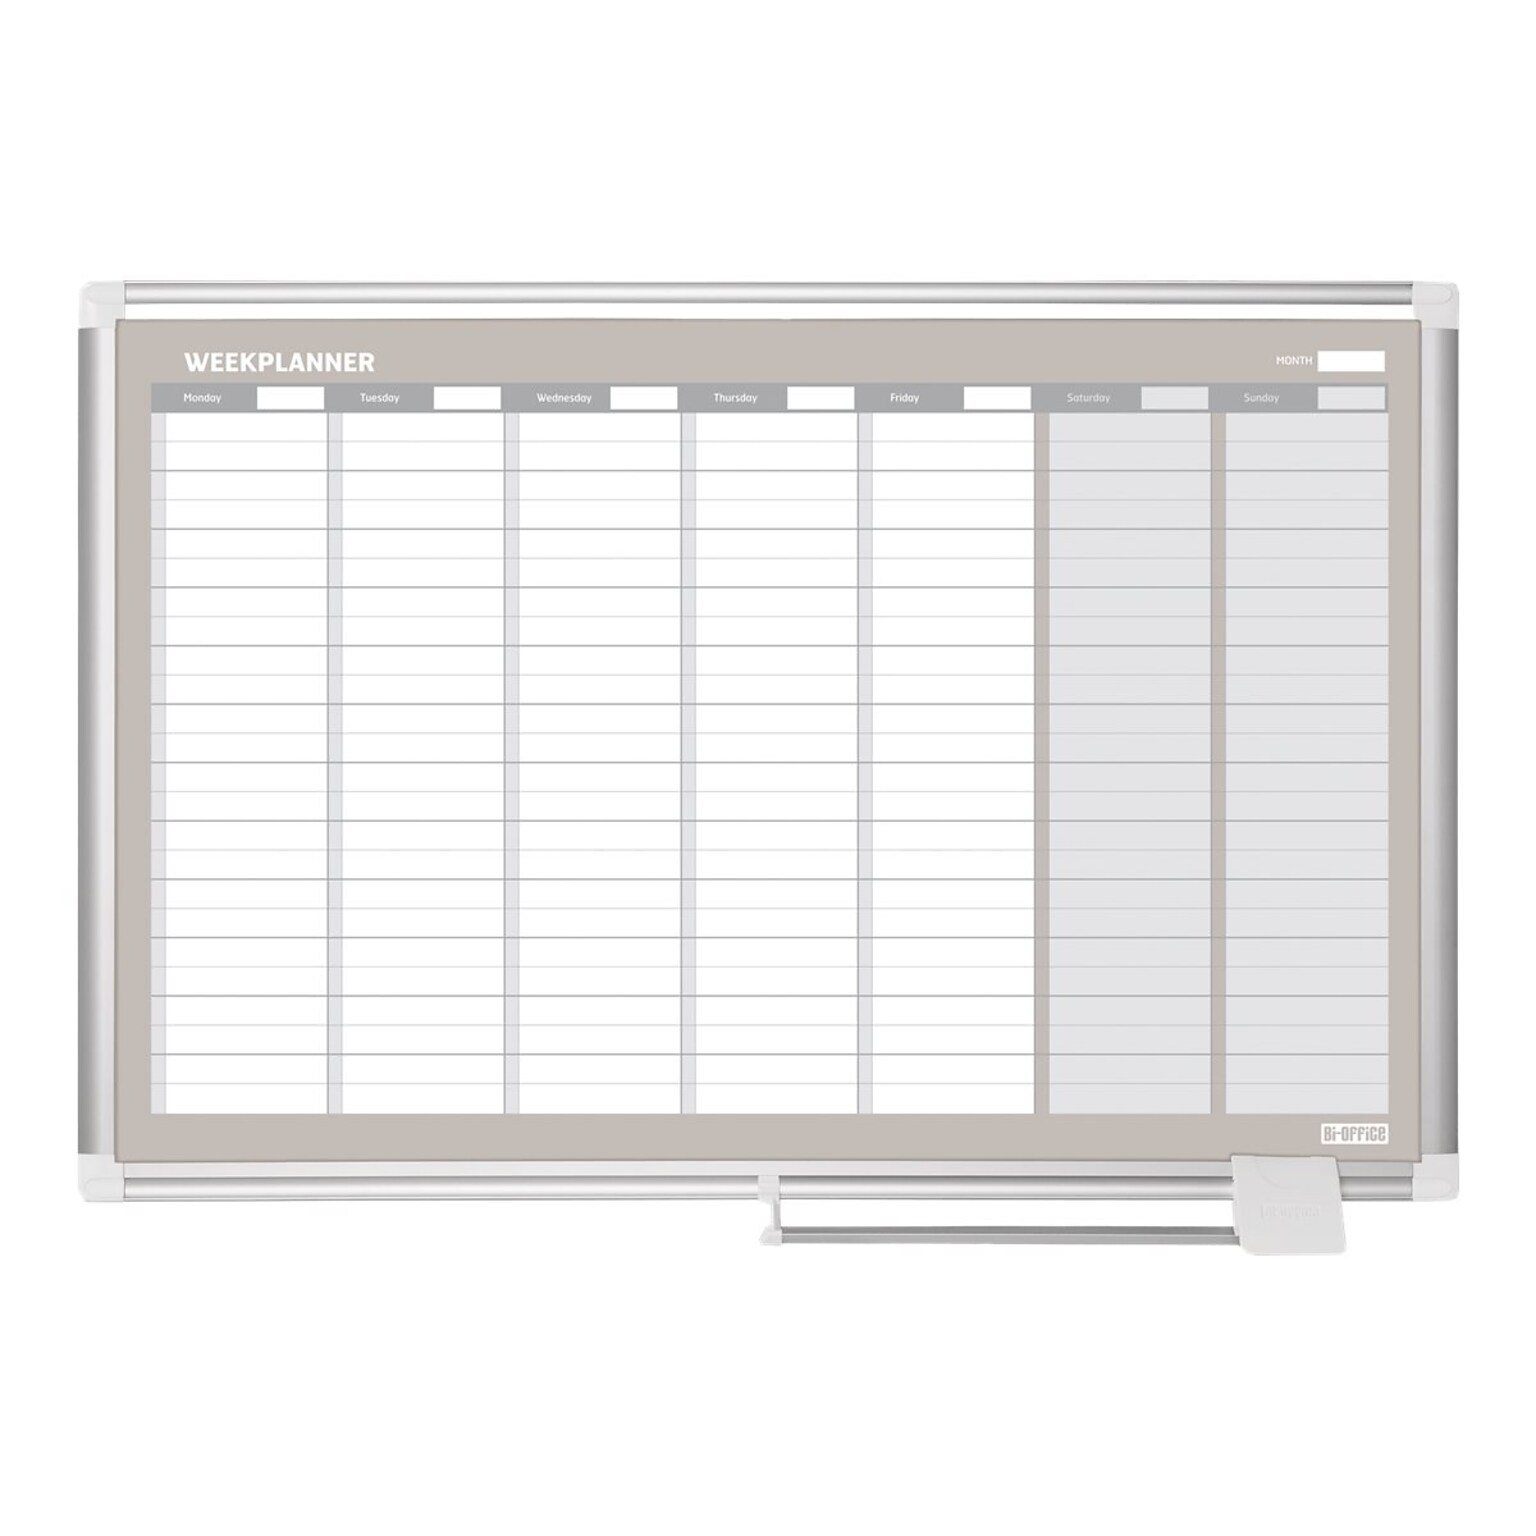 MasterVision Gold Ultra Magnetic Dry-Erase Paint Planning Board, 3 x 2 (GA0396830)